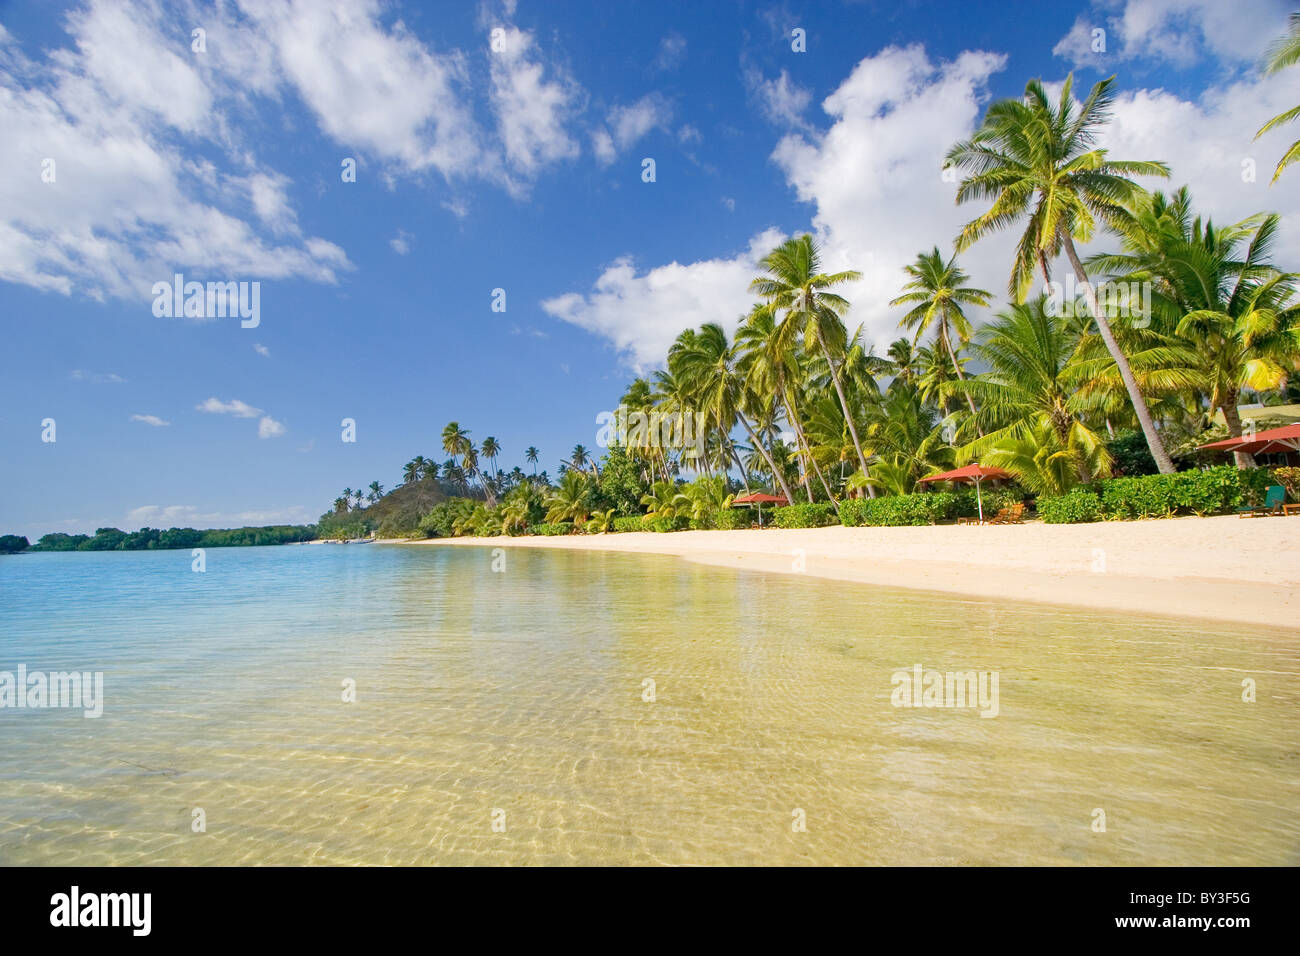 Clear water, white sandy beach and palm trees on a tropical island in Fiji Stock Photo